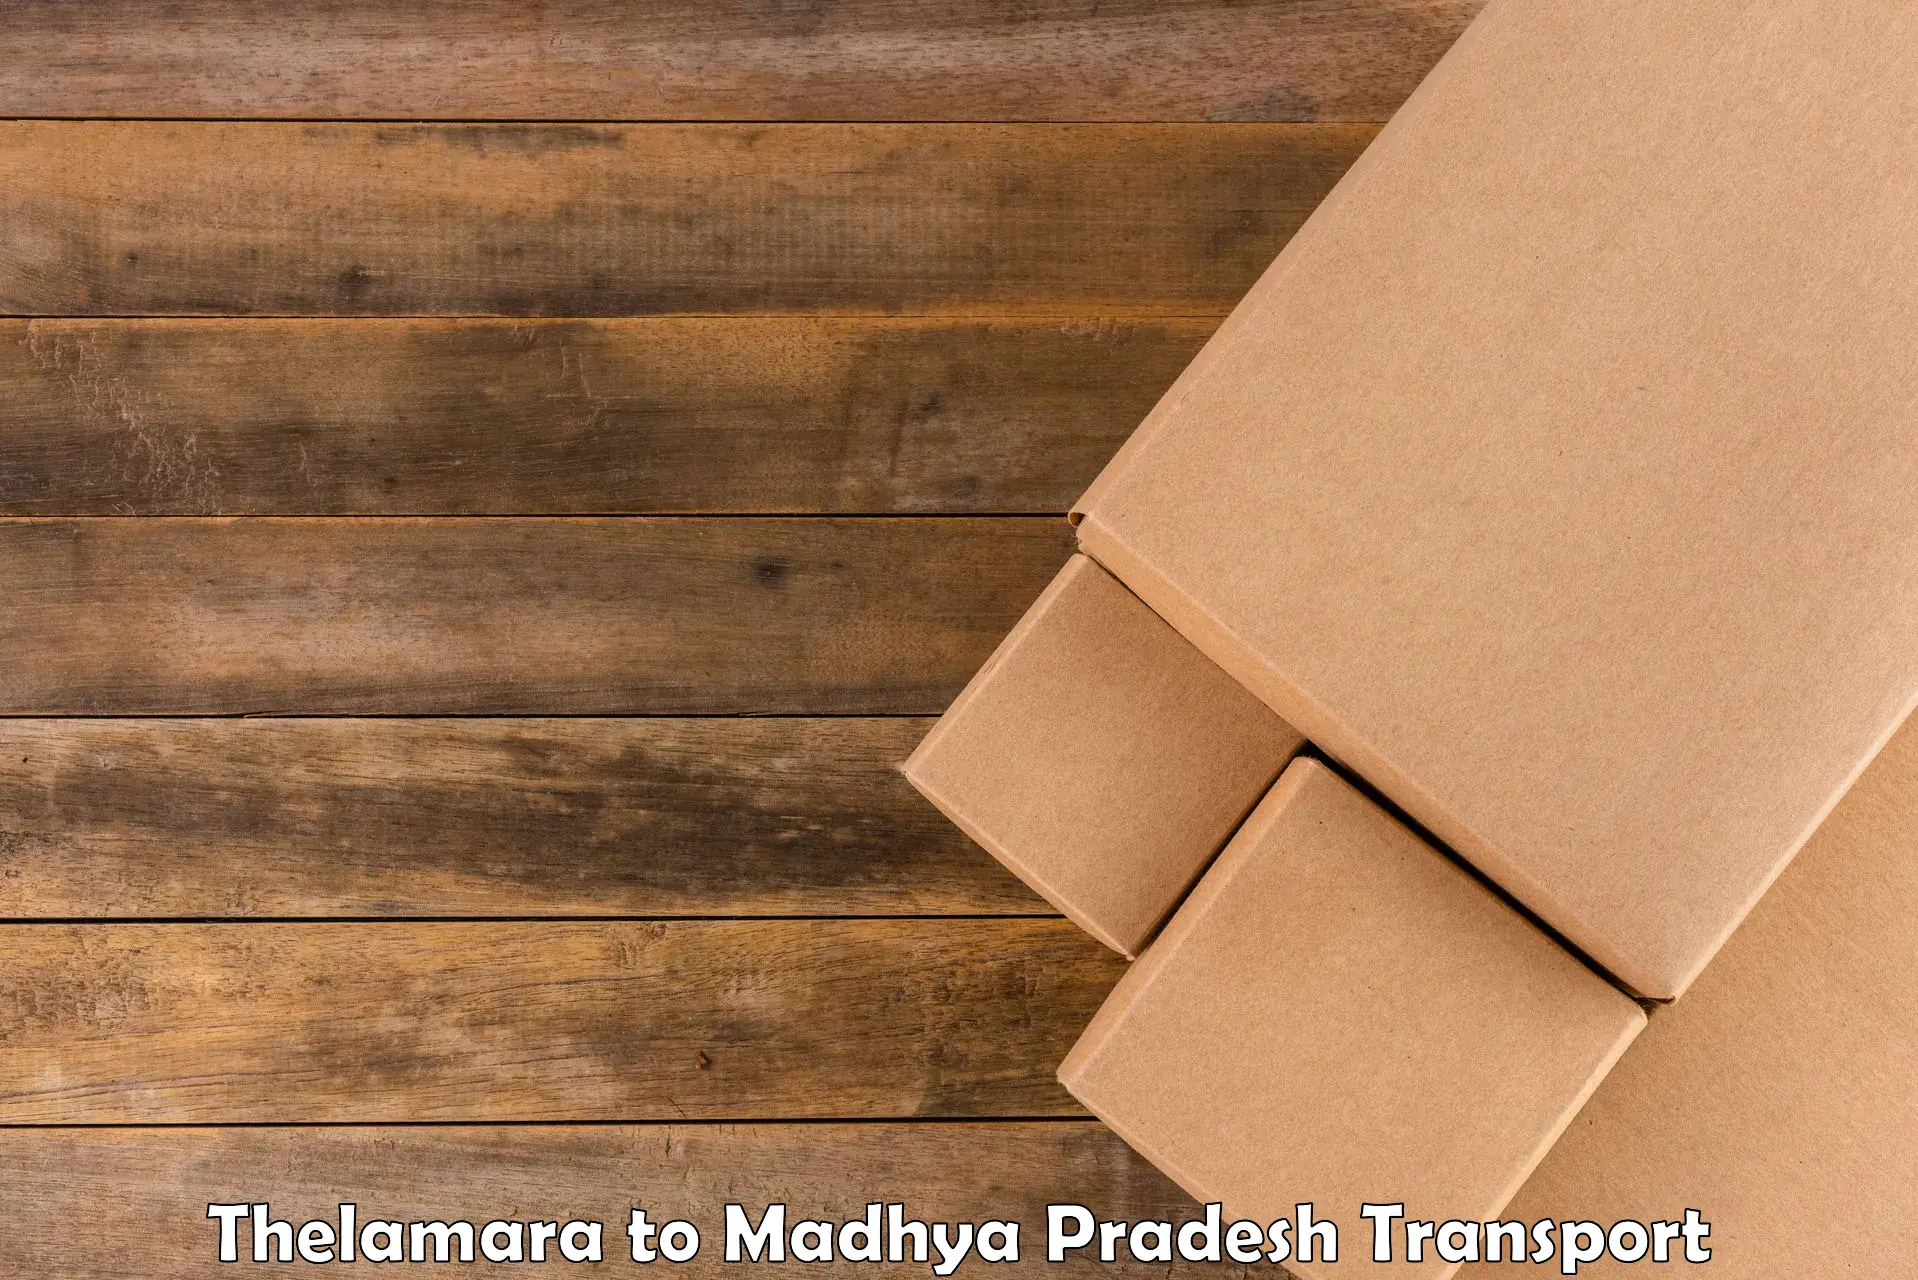 Commercial transport service Thelamara to Manawar